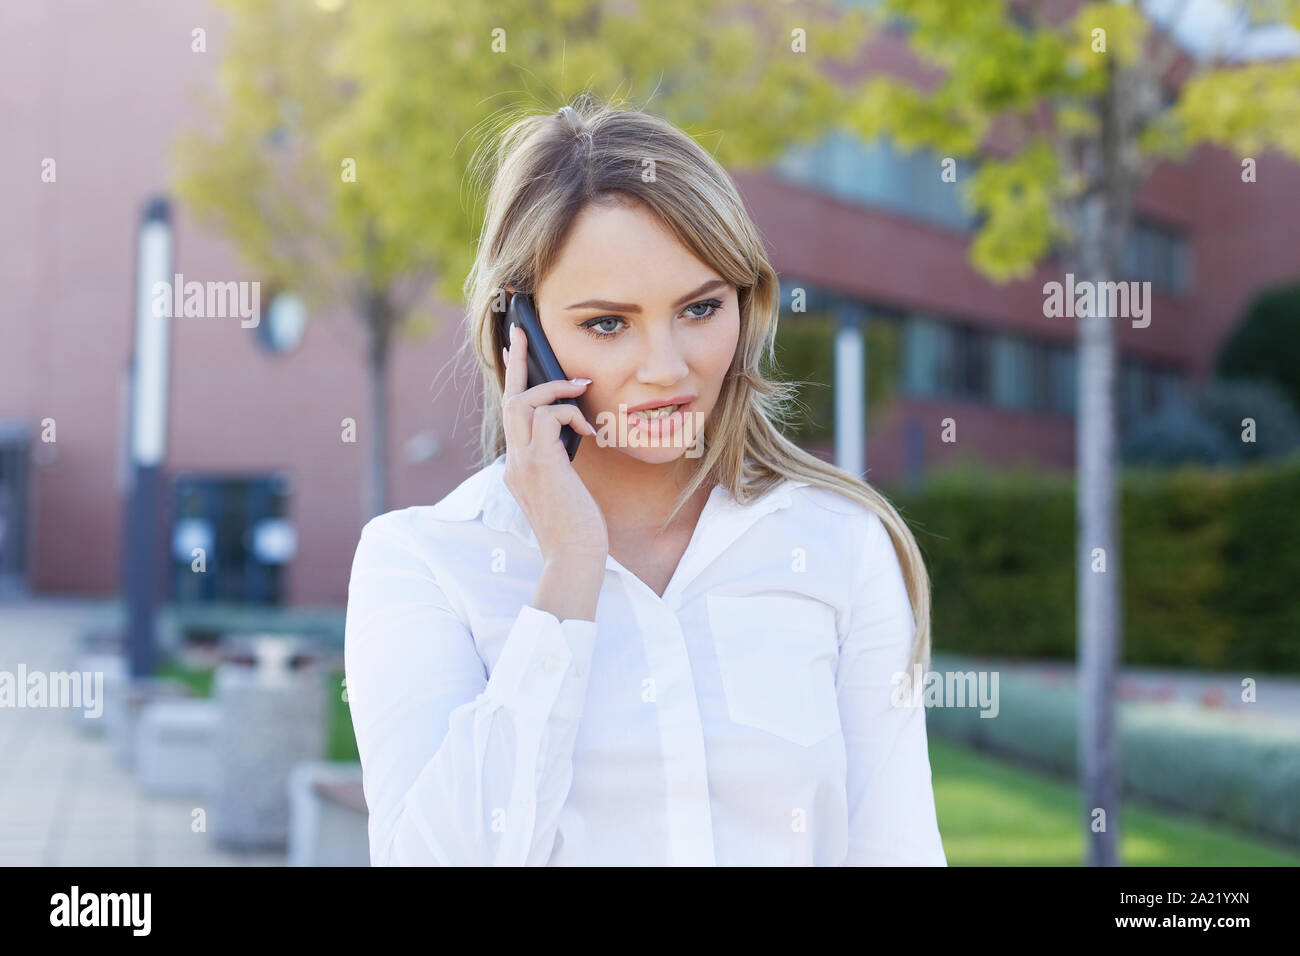 Serious blonde manager woman portrait calling in park Stock Photo